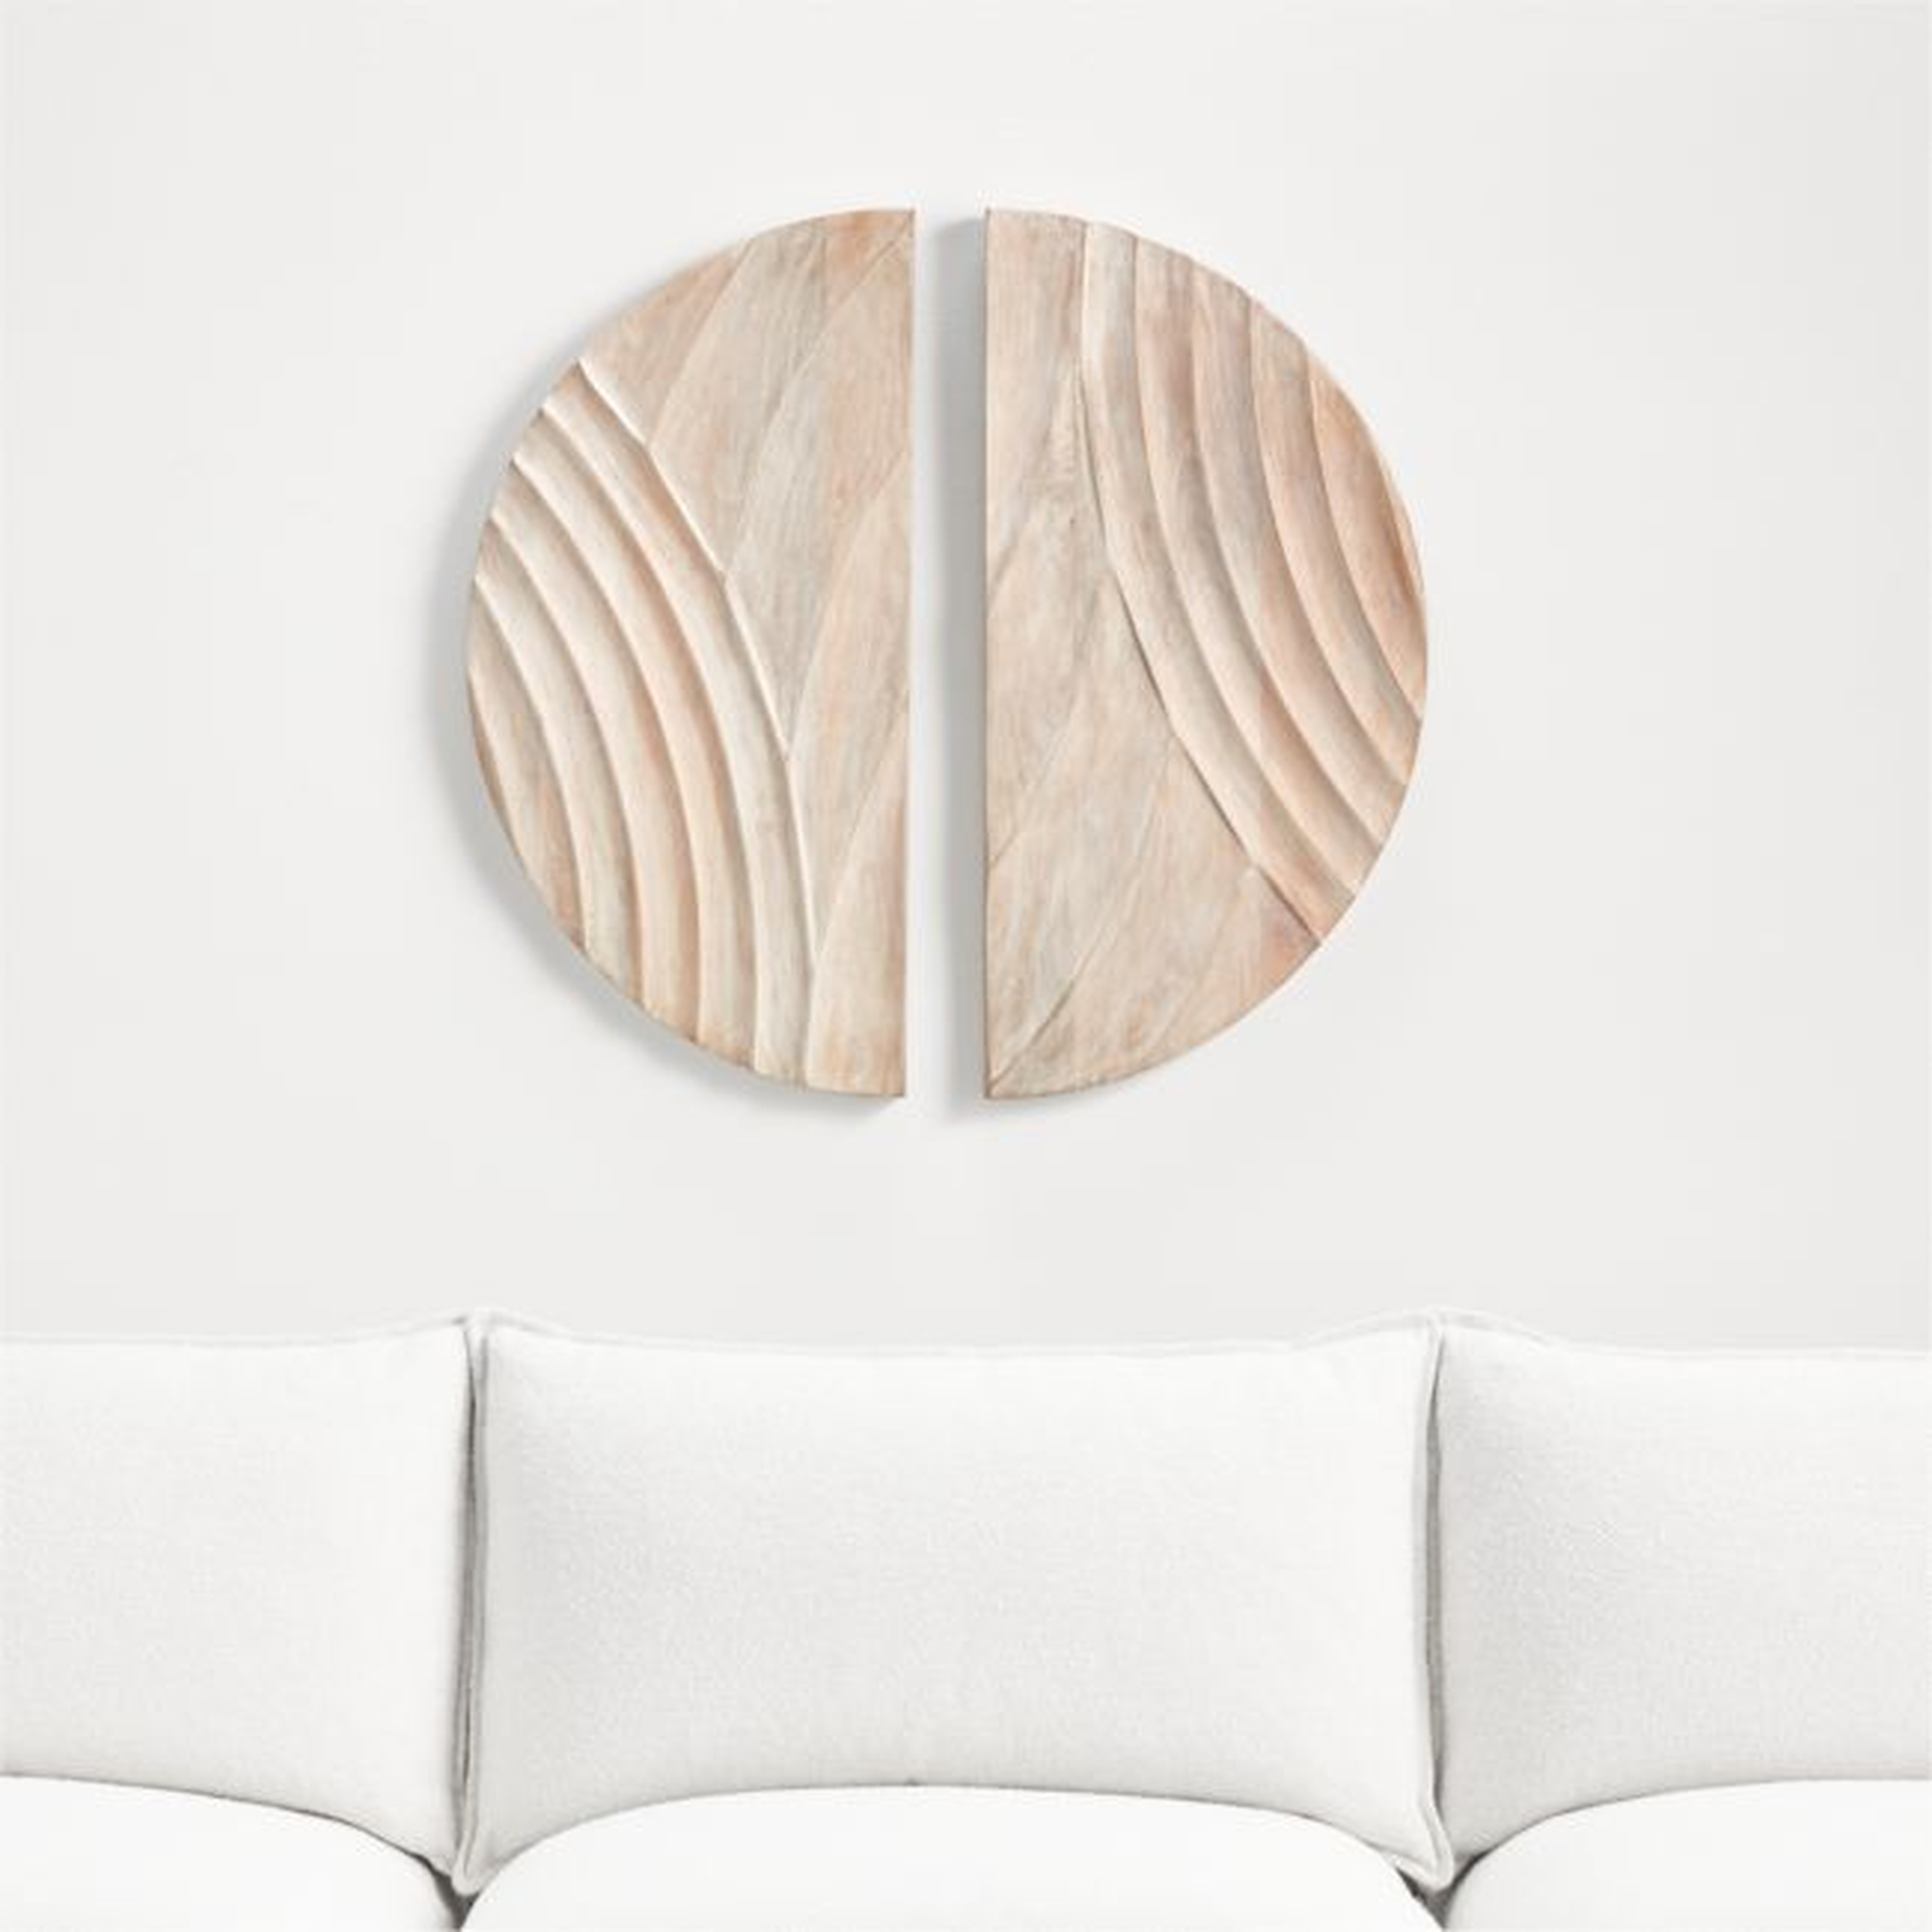 Dune Bleached Wood Wall Art, 30" x 30" - Crate and Barrel